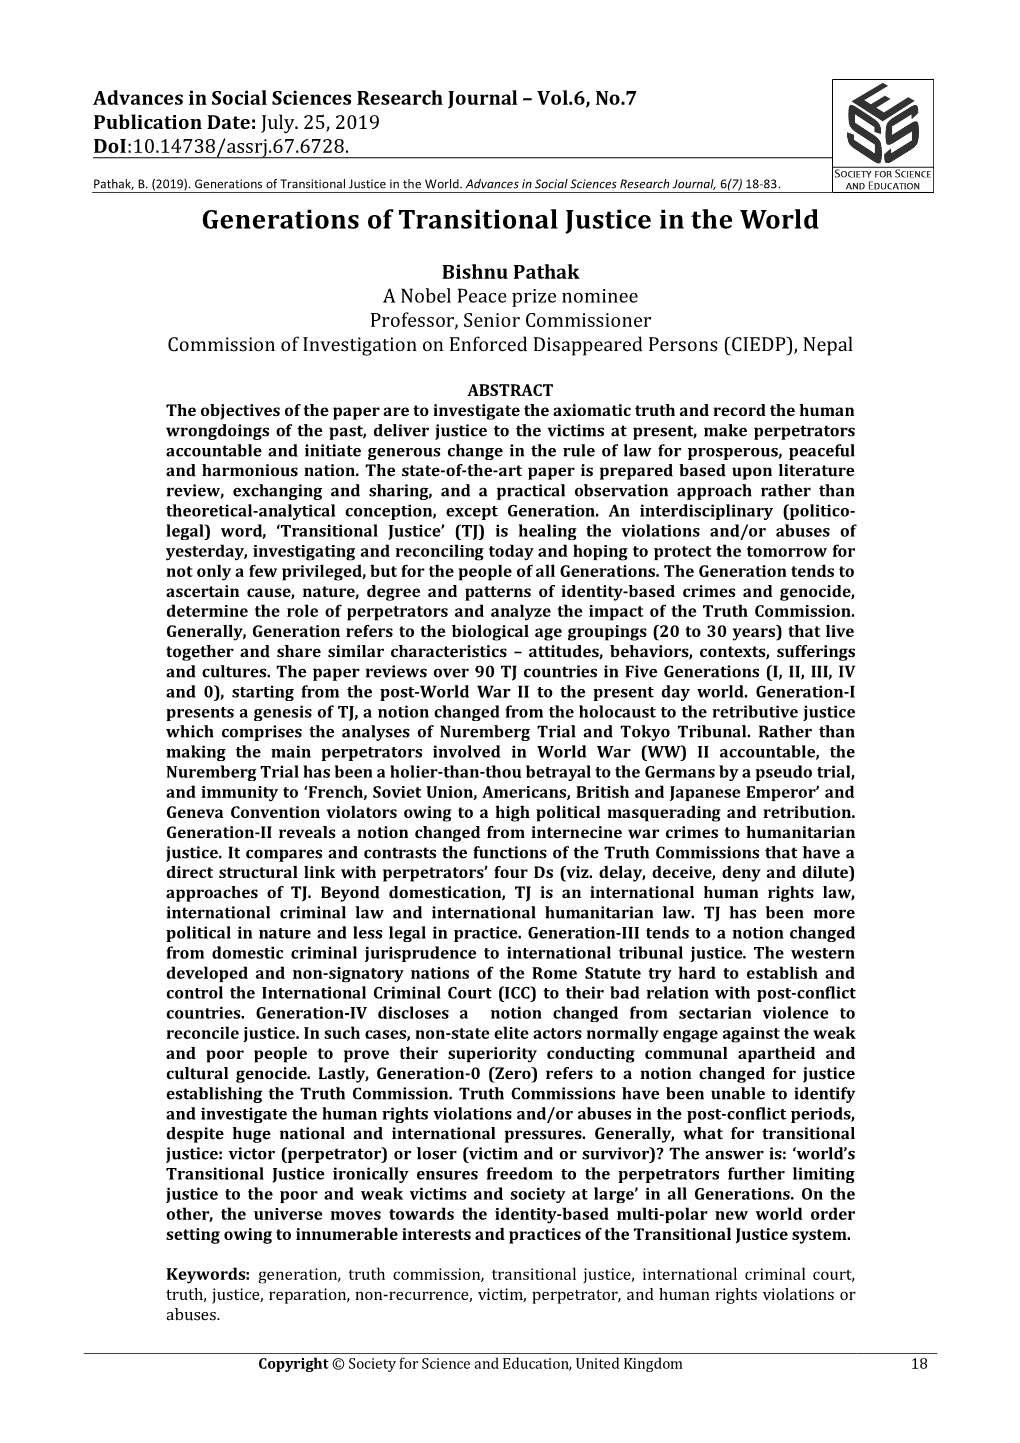 Generations of Transitional Justice in the World